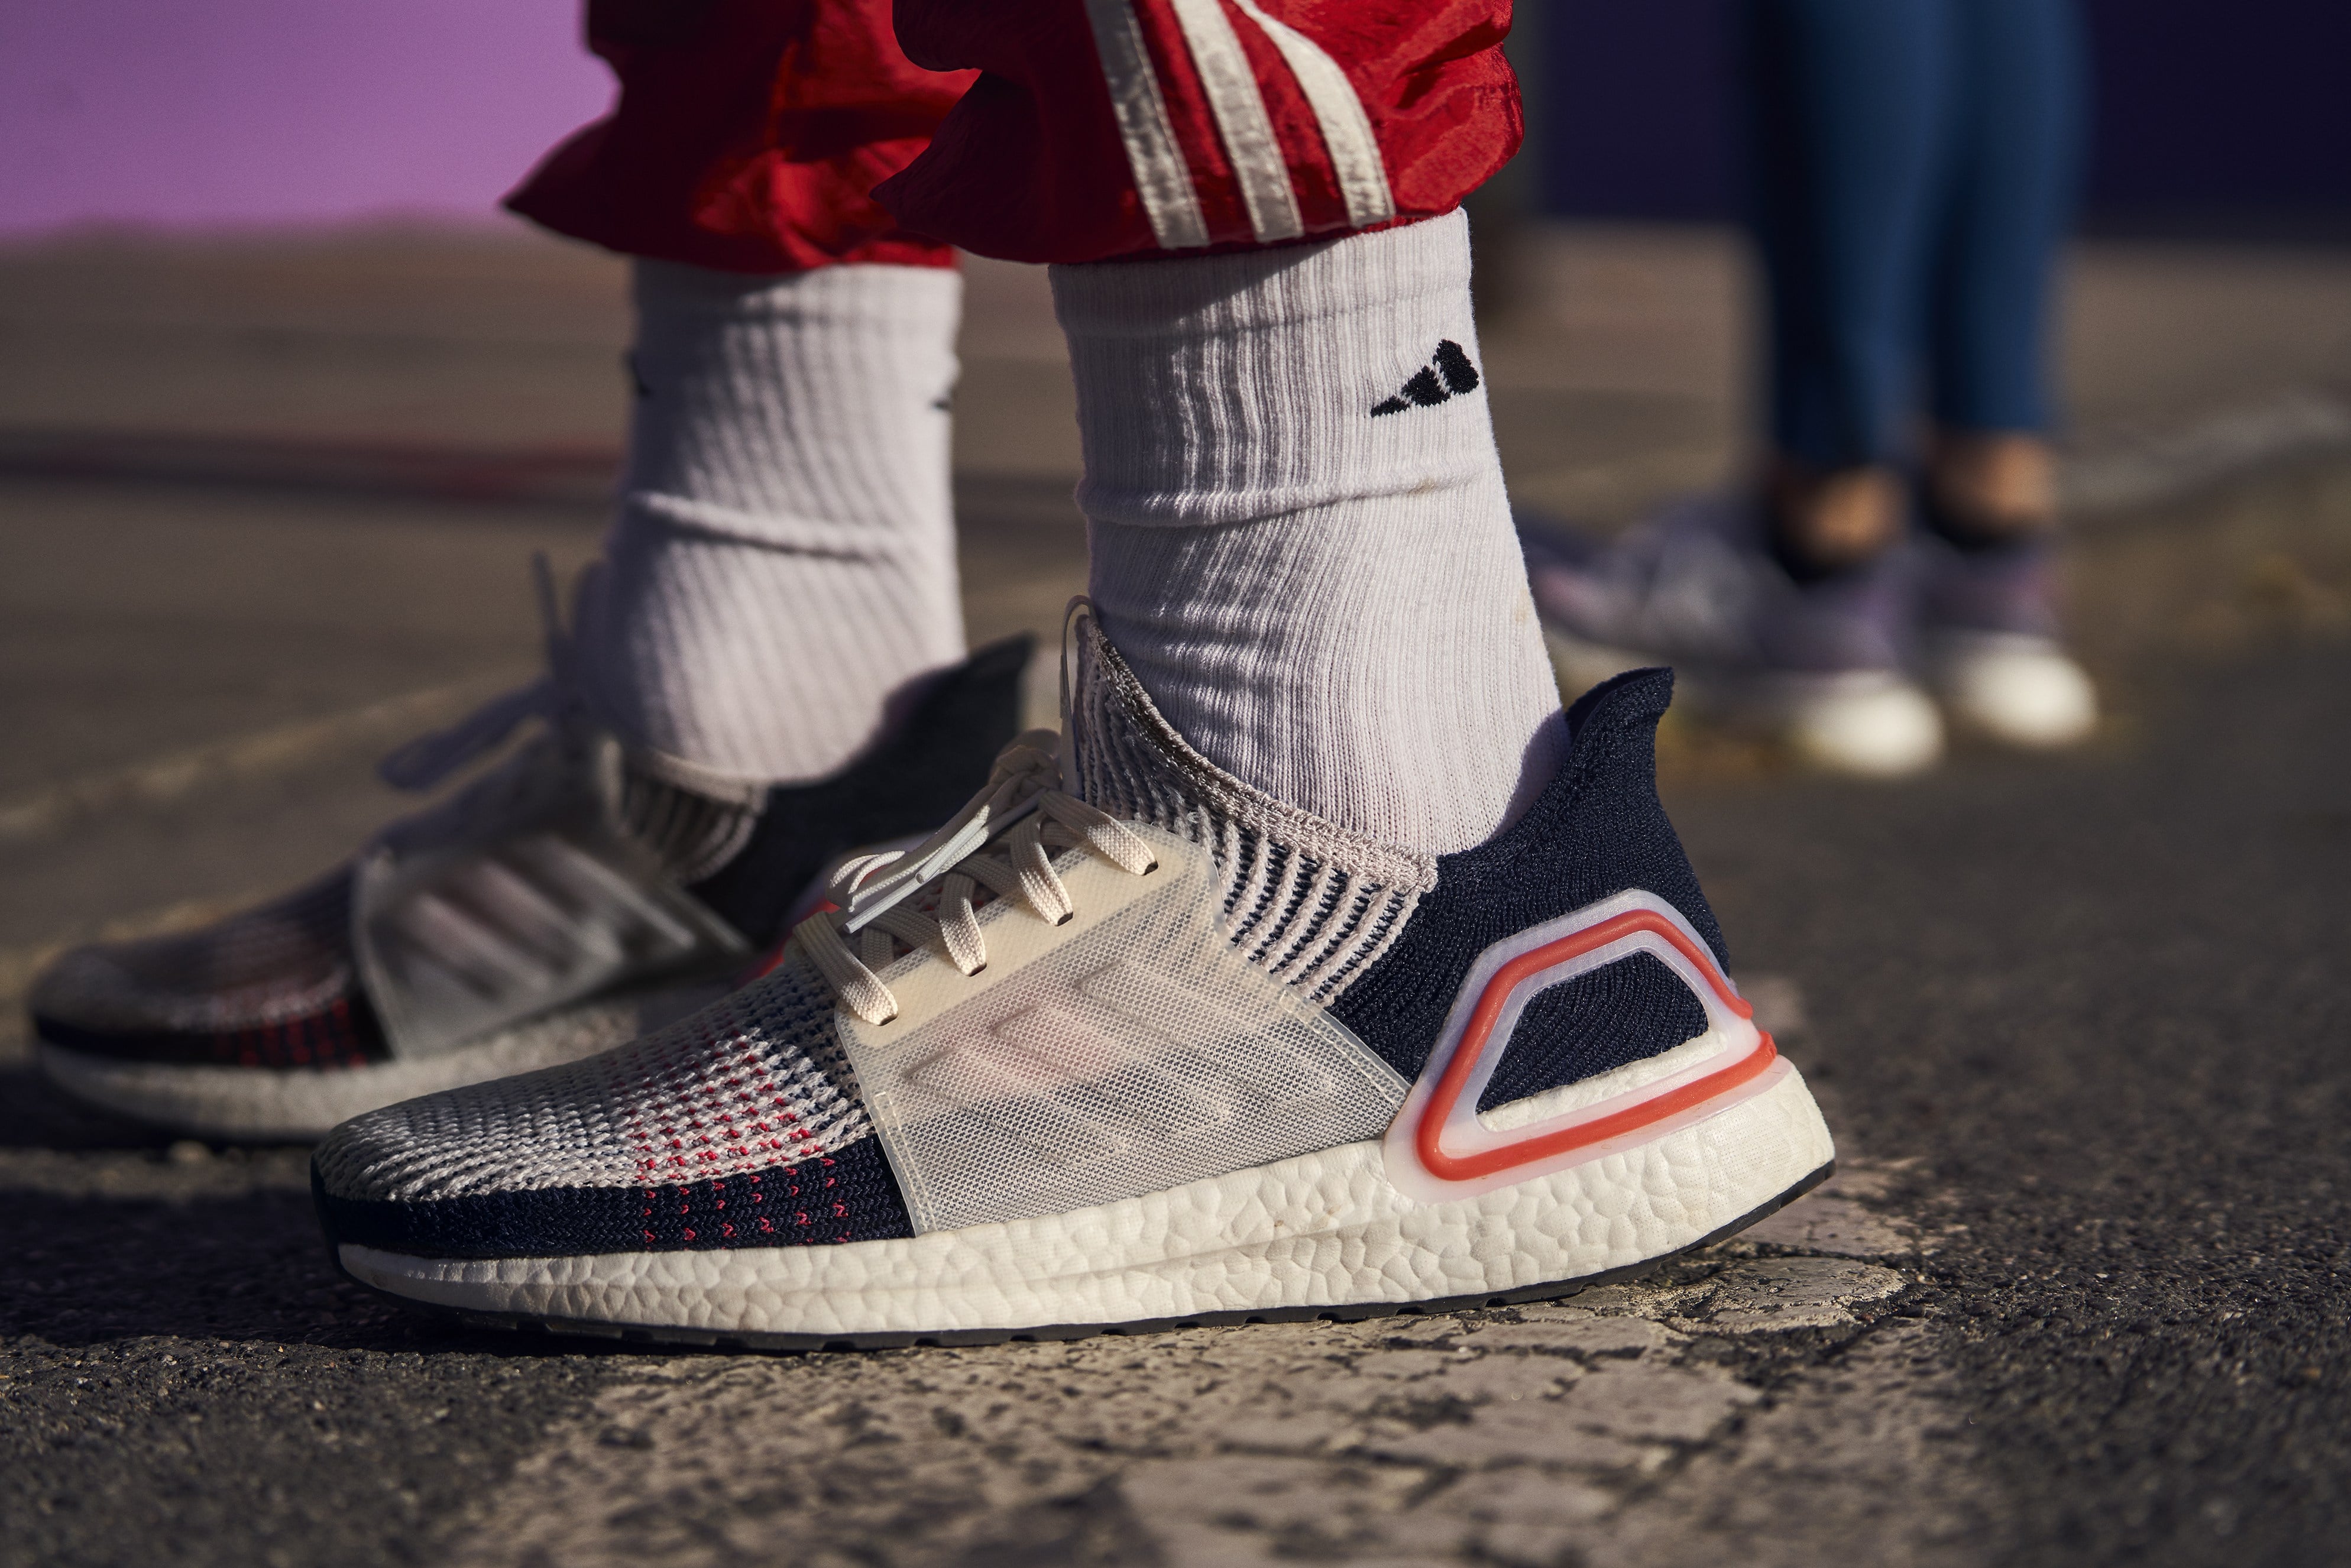 Liquefy Relationship picture Adidas launches Ultraboost 19 in India with Saiyami Kher